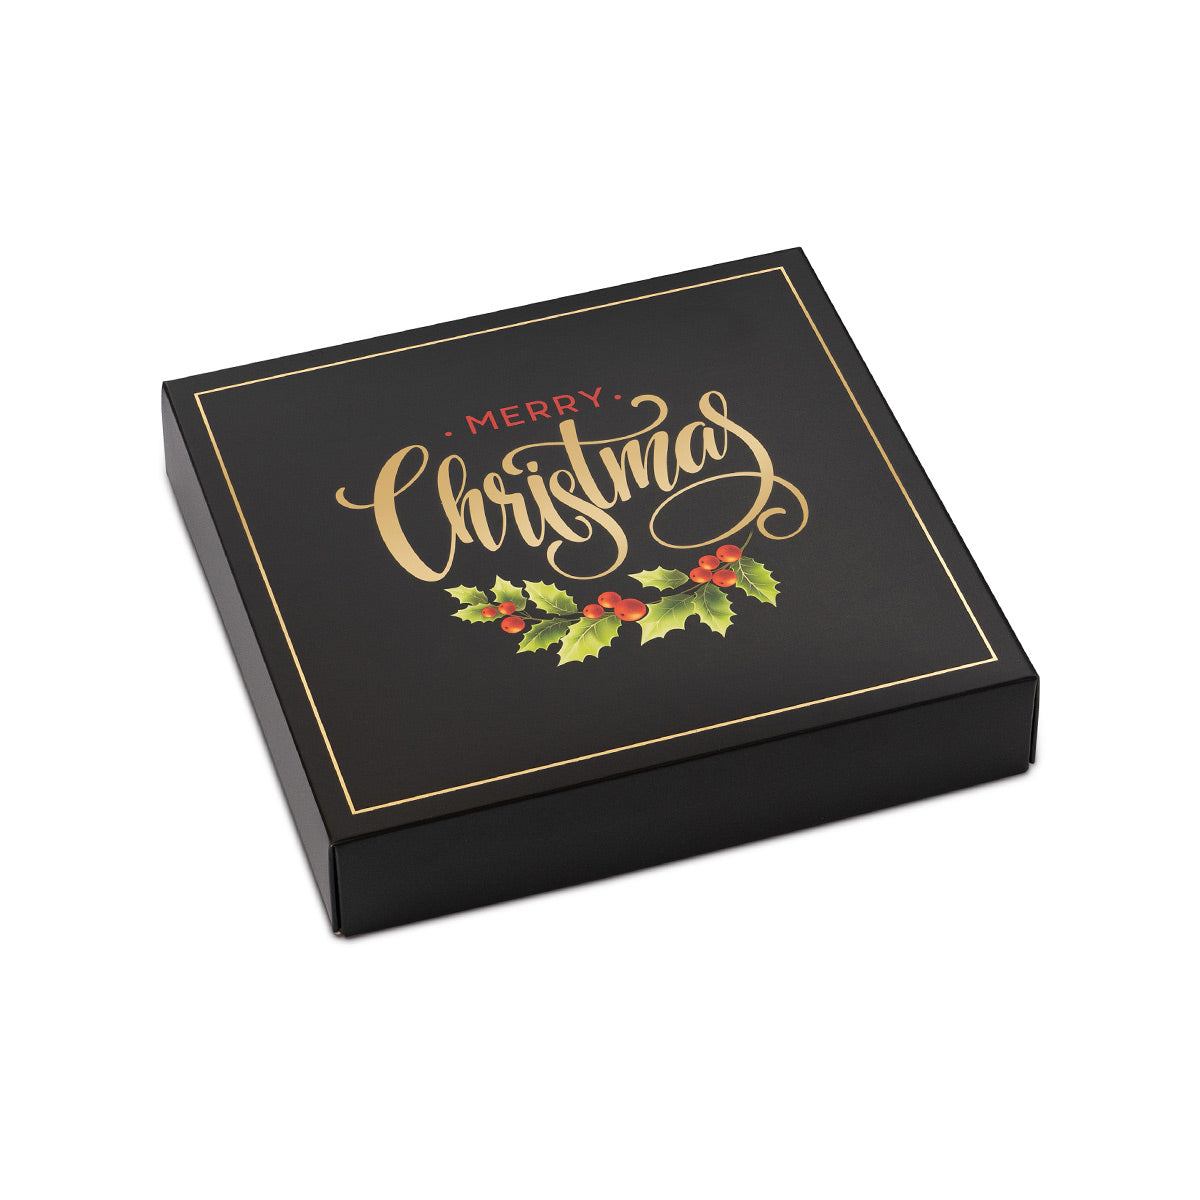 Merry Christmas Themed Box Cover for 9 Piece Holiday Assortment